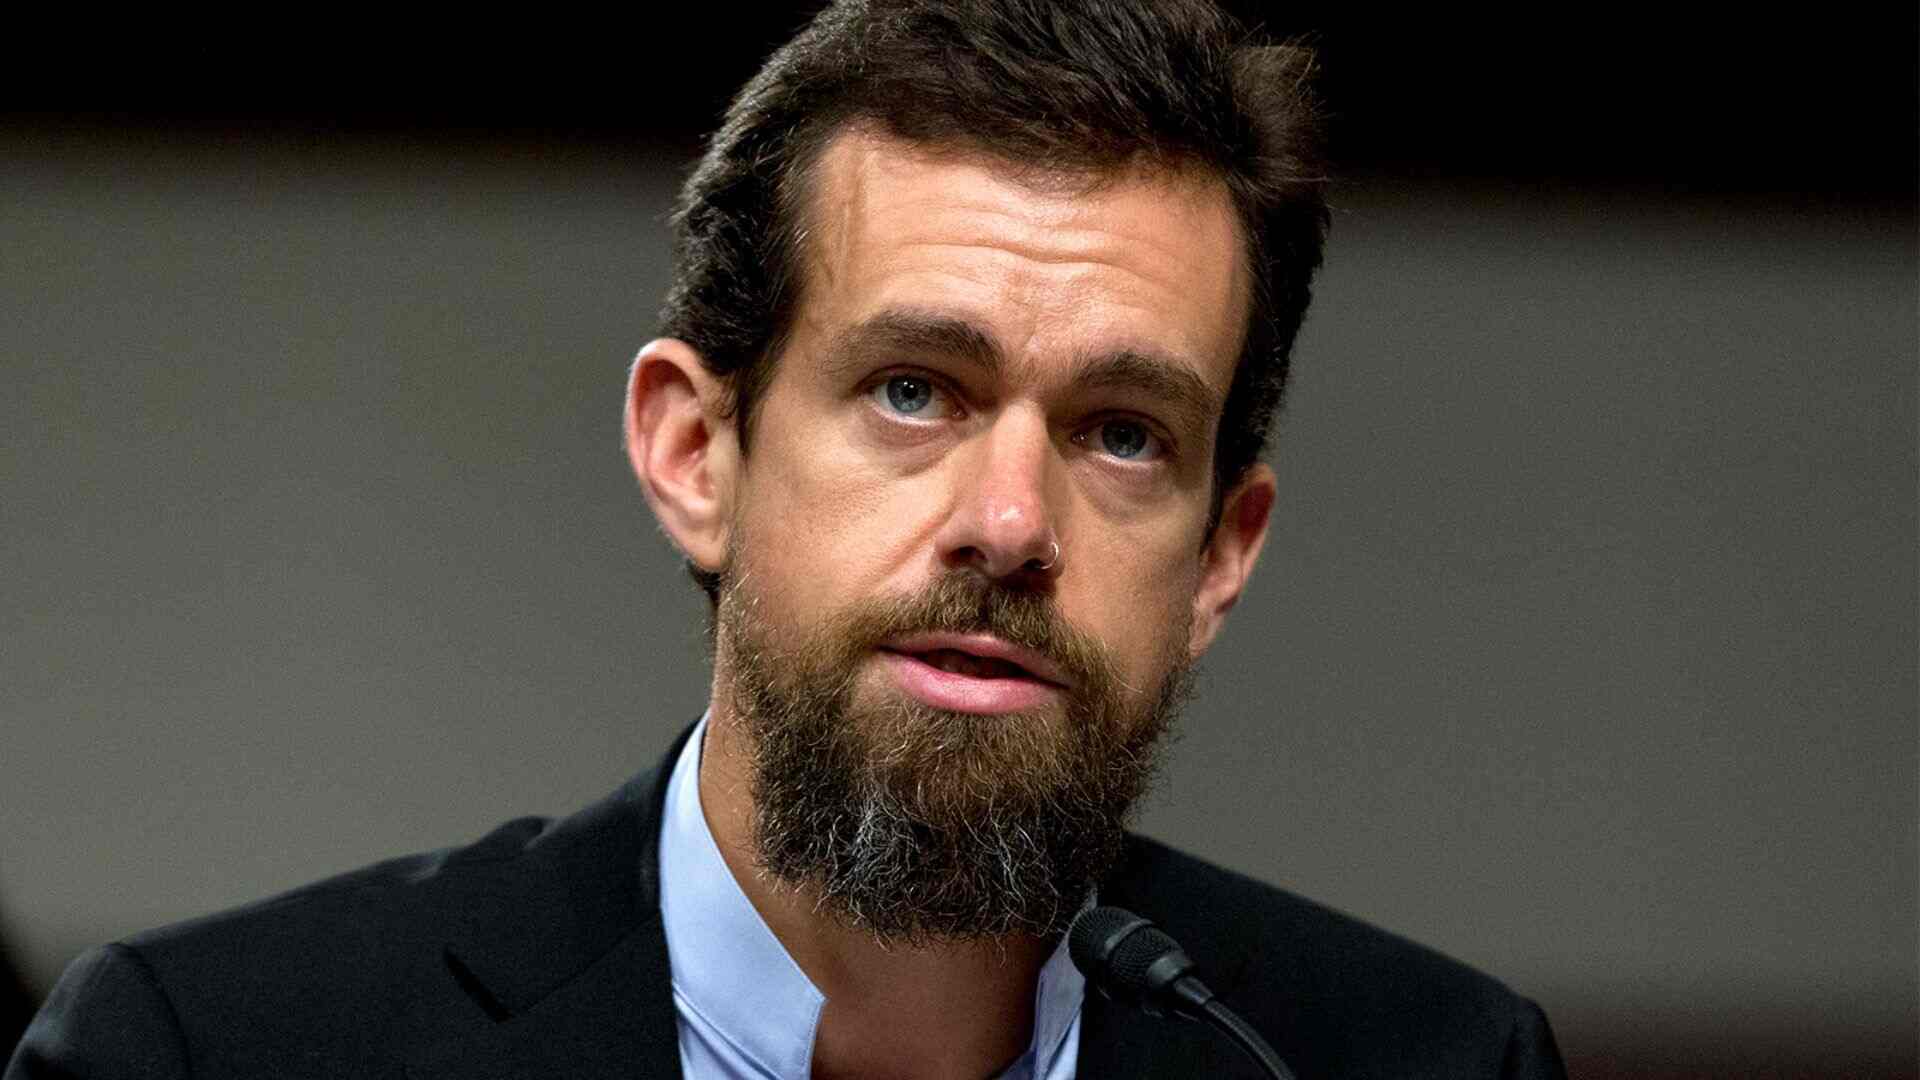 Jack Dorsey, the creator of Twitter, has been labeled a 'Jew hater' for supporting anti-Israel demonstrators who took a building at Columbia University